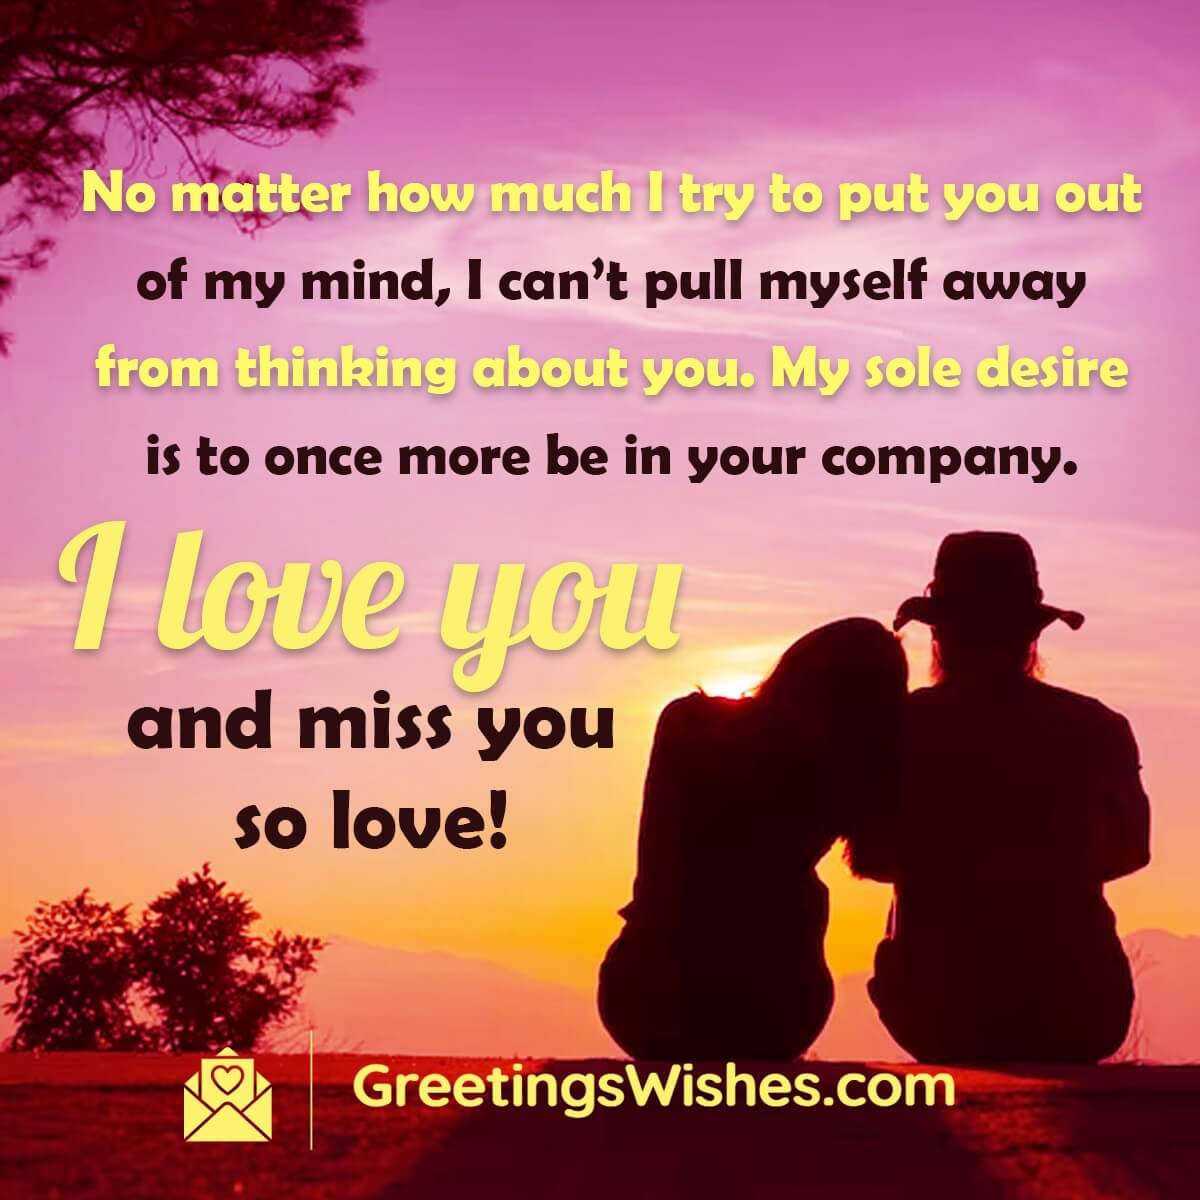 I Miss You Messages For Love - Greetings Wishes